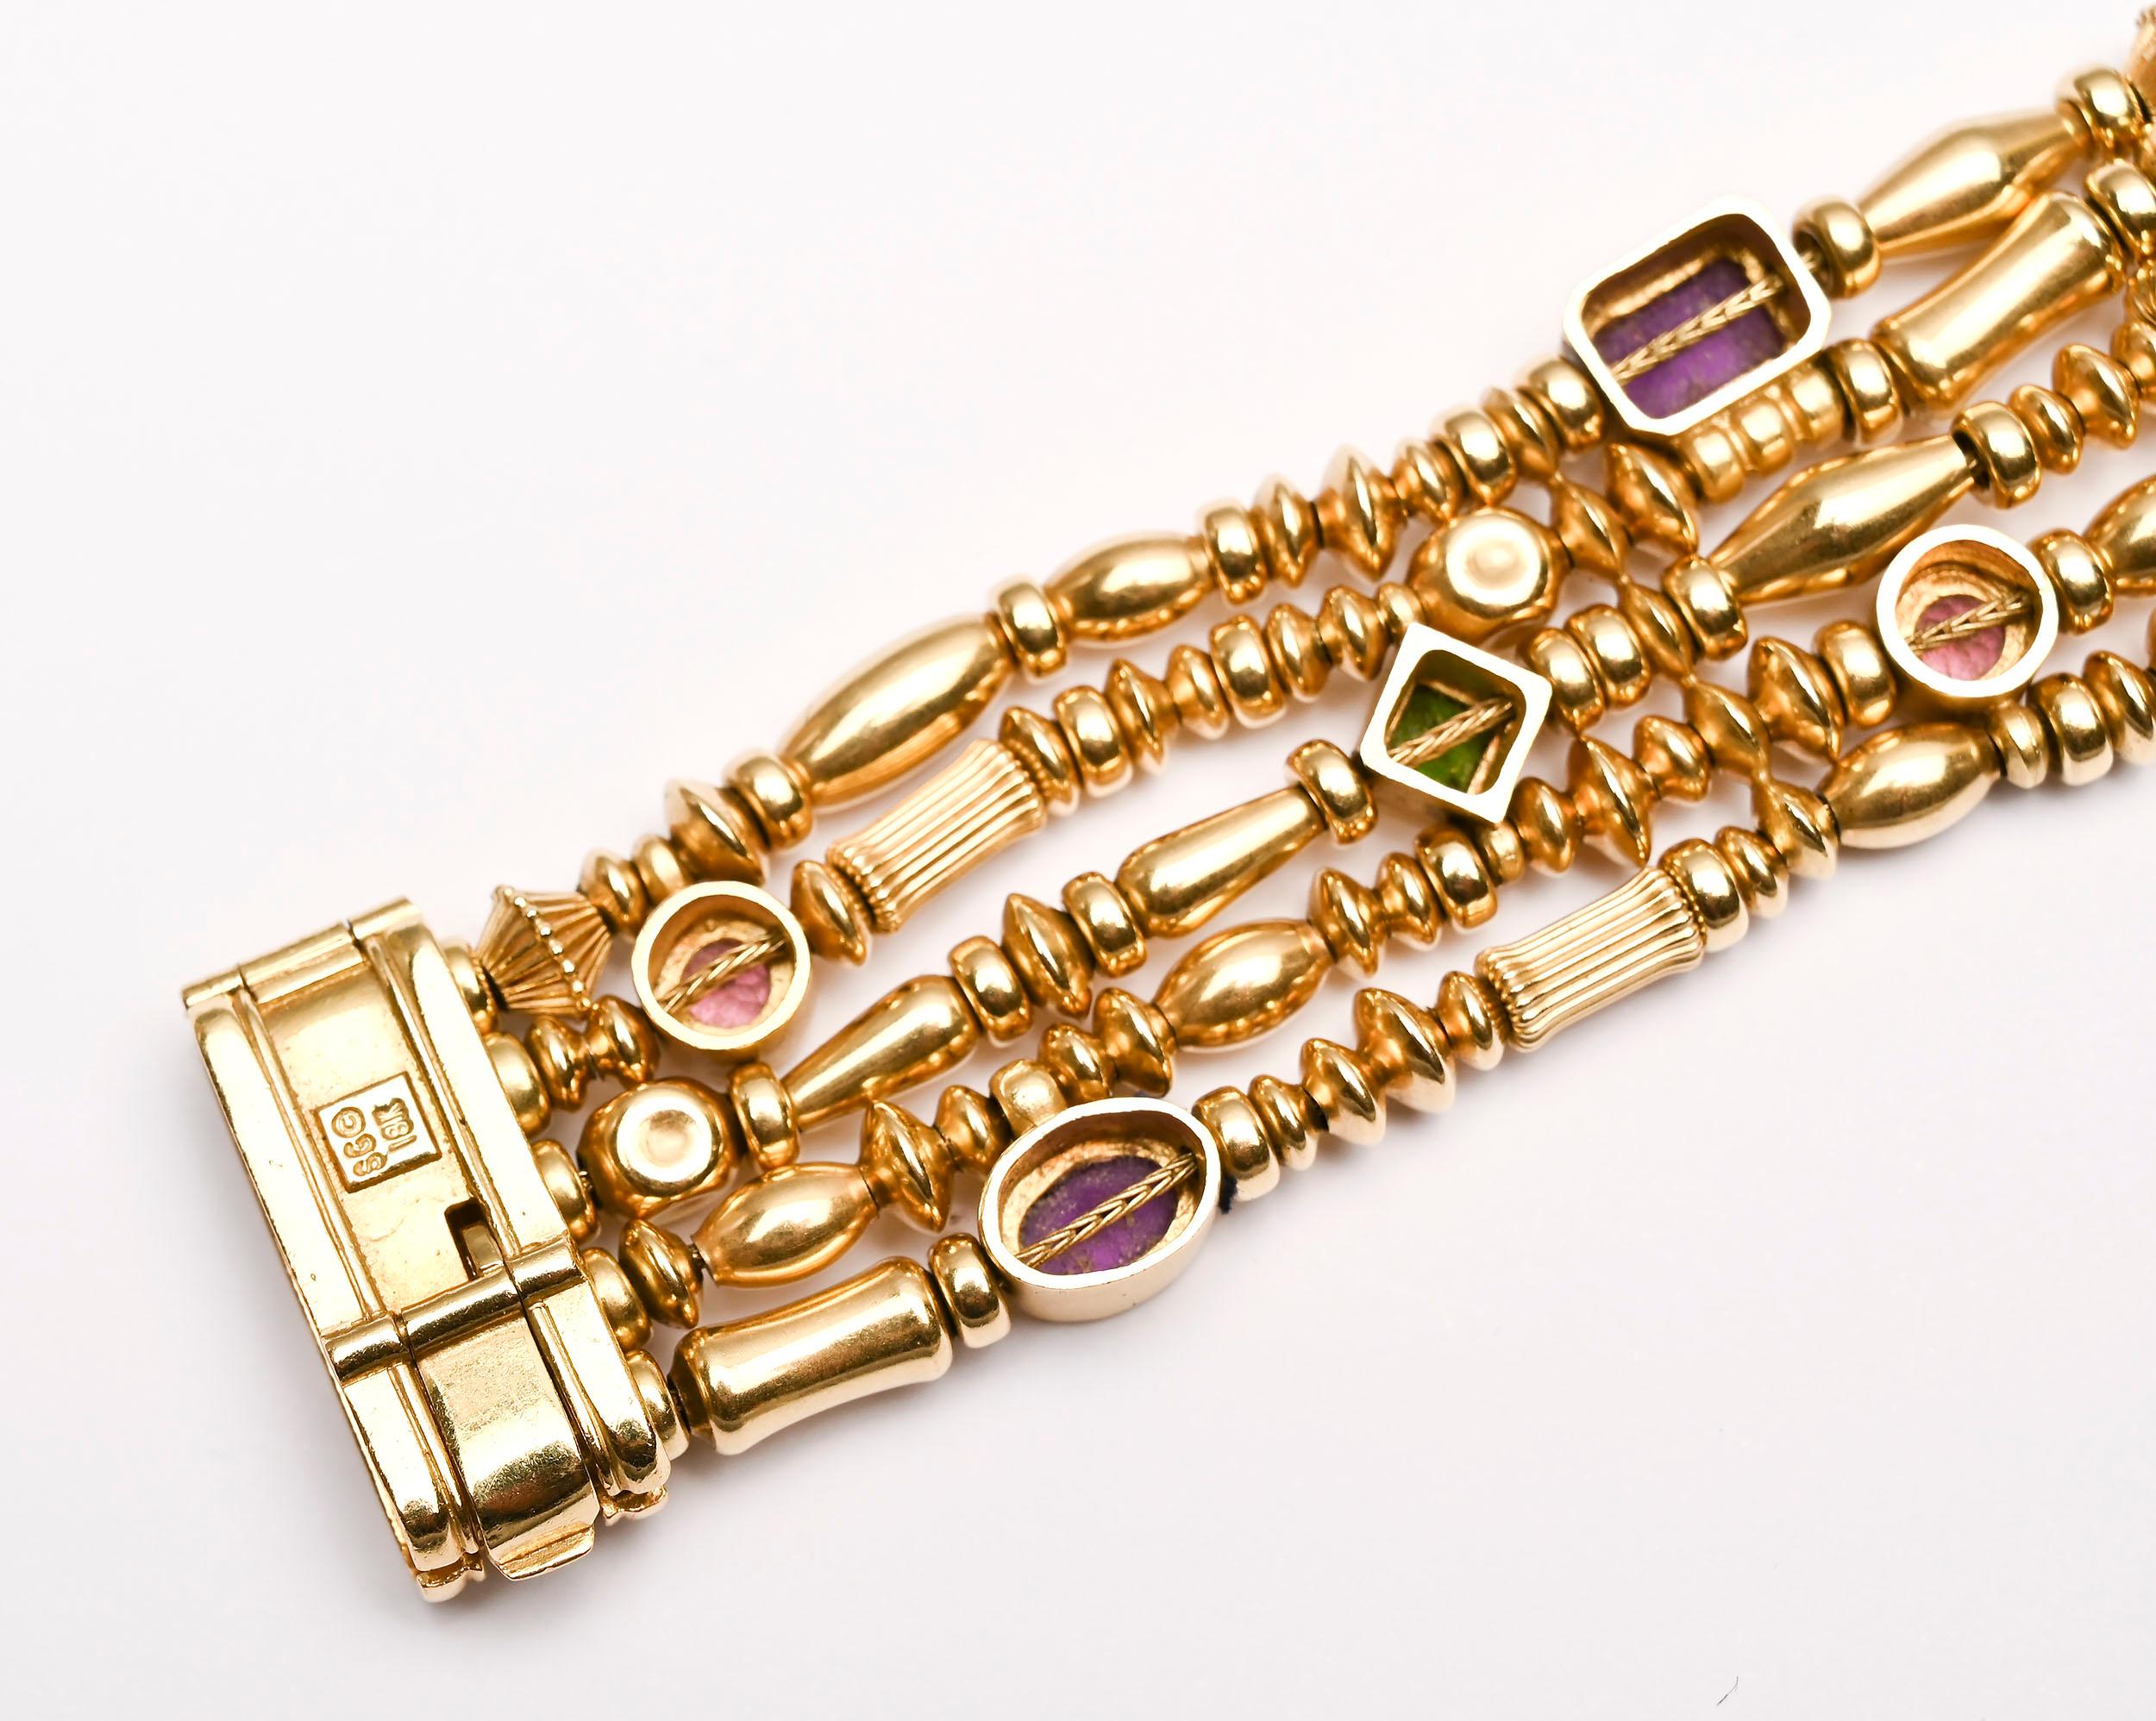 Contemporary Seidengang Multistrand Gold and Gemstone Bracelet For Sale